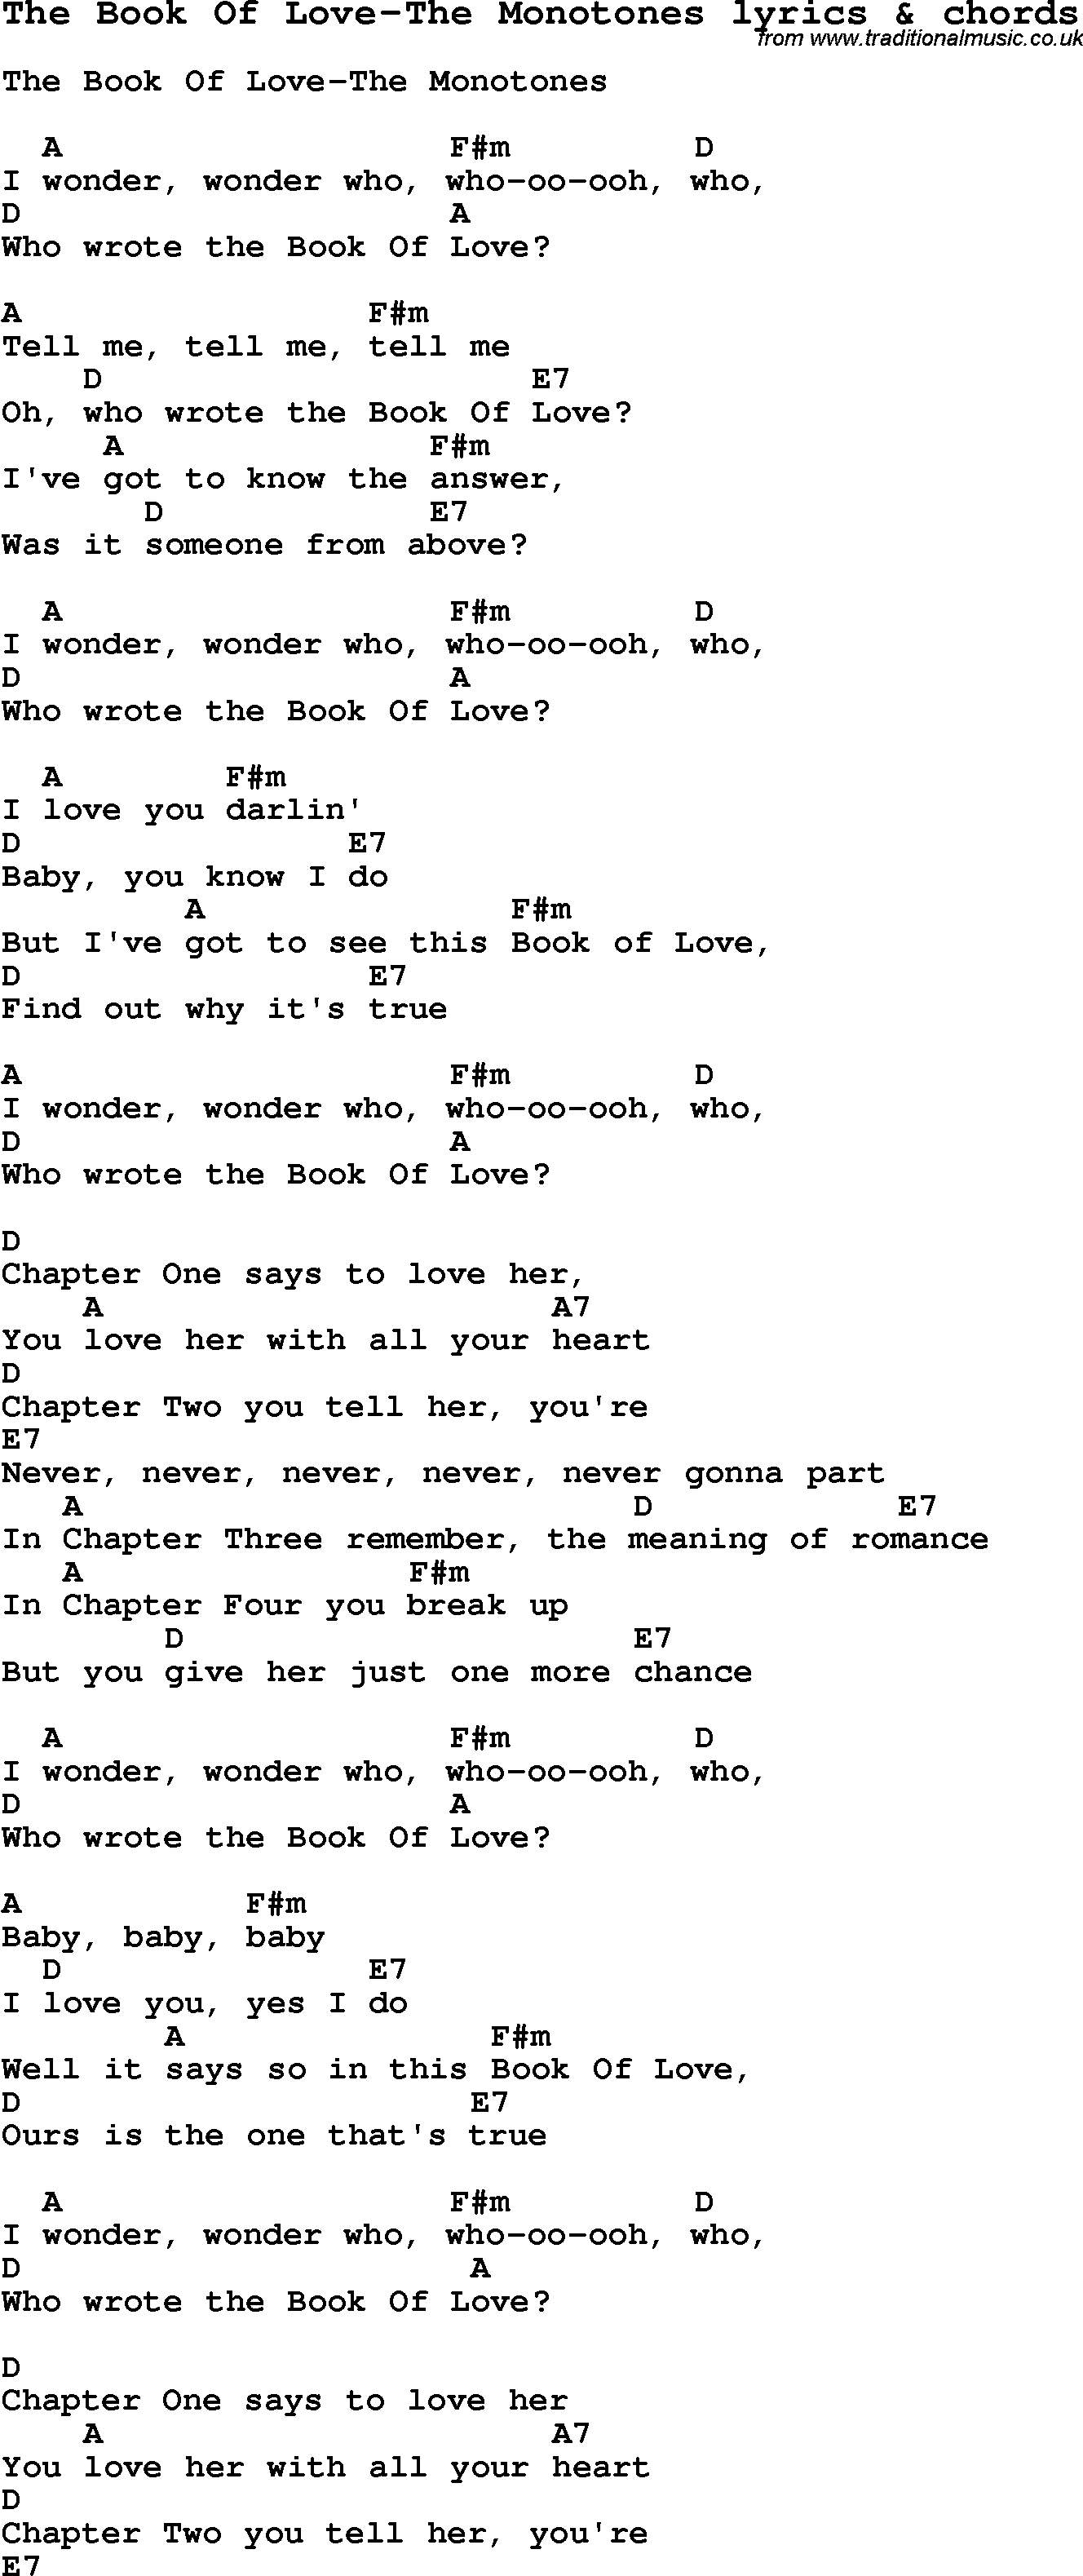 Love Song Lyrics for: The Book Of Love-The Monotones with chords for Ukulele, Guitar Banjo etc.